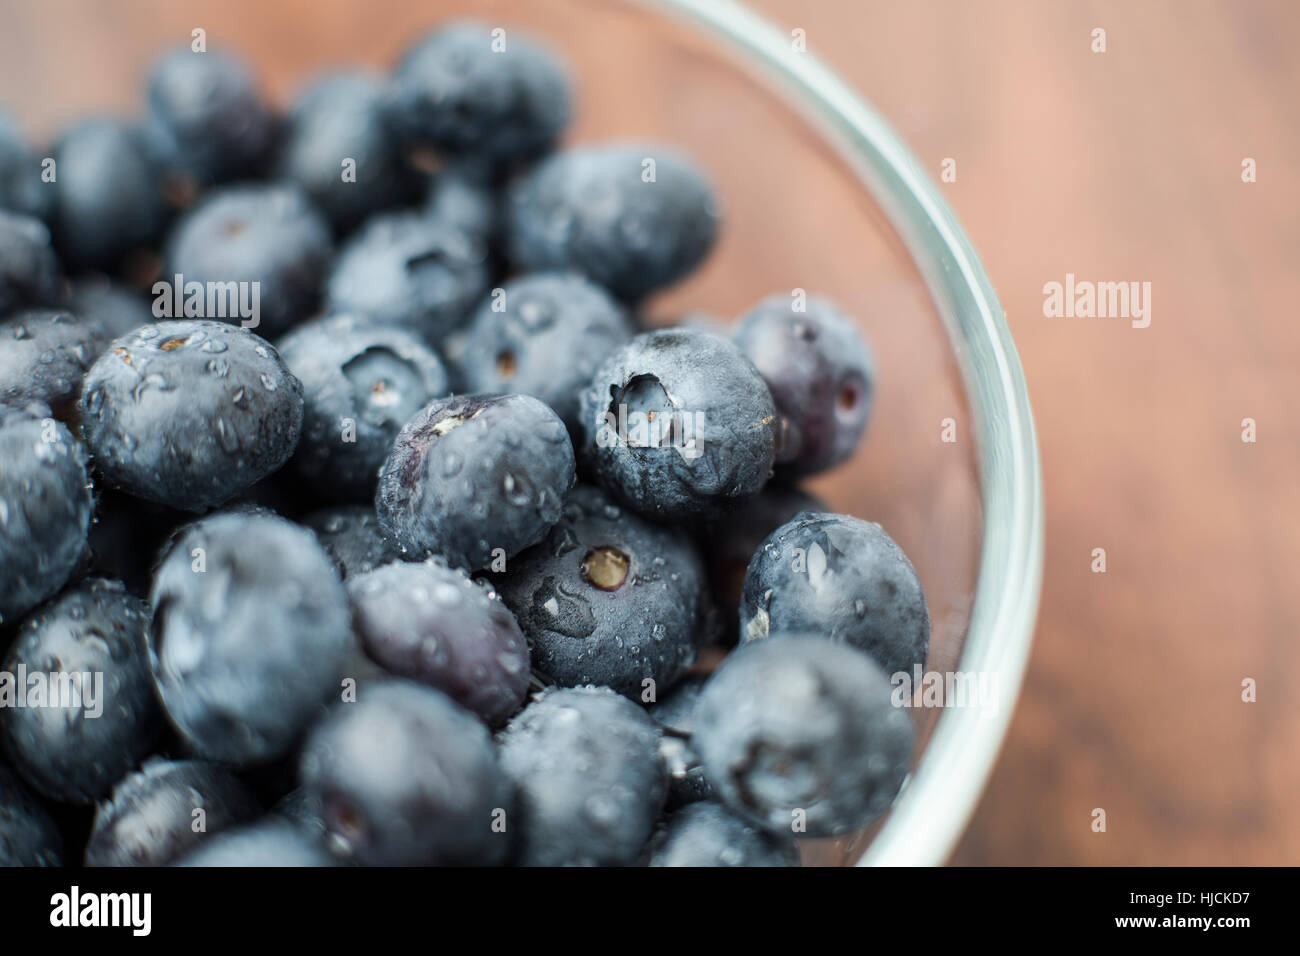 A glass bowl piled with fresh organic blueberries Stock Photo